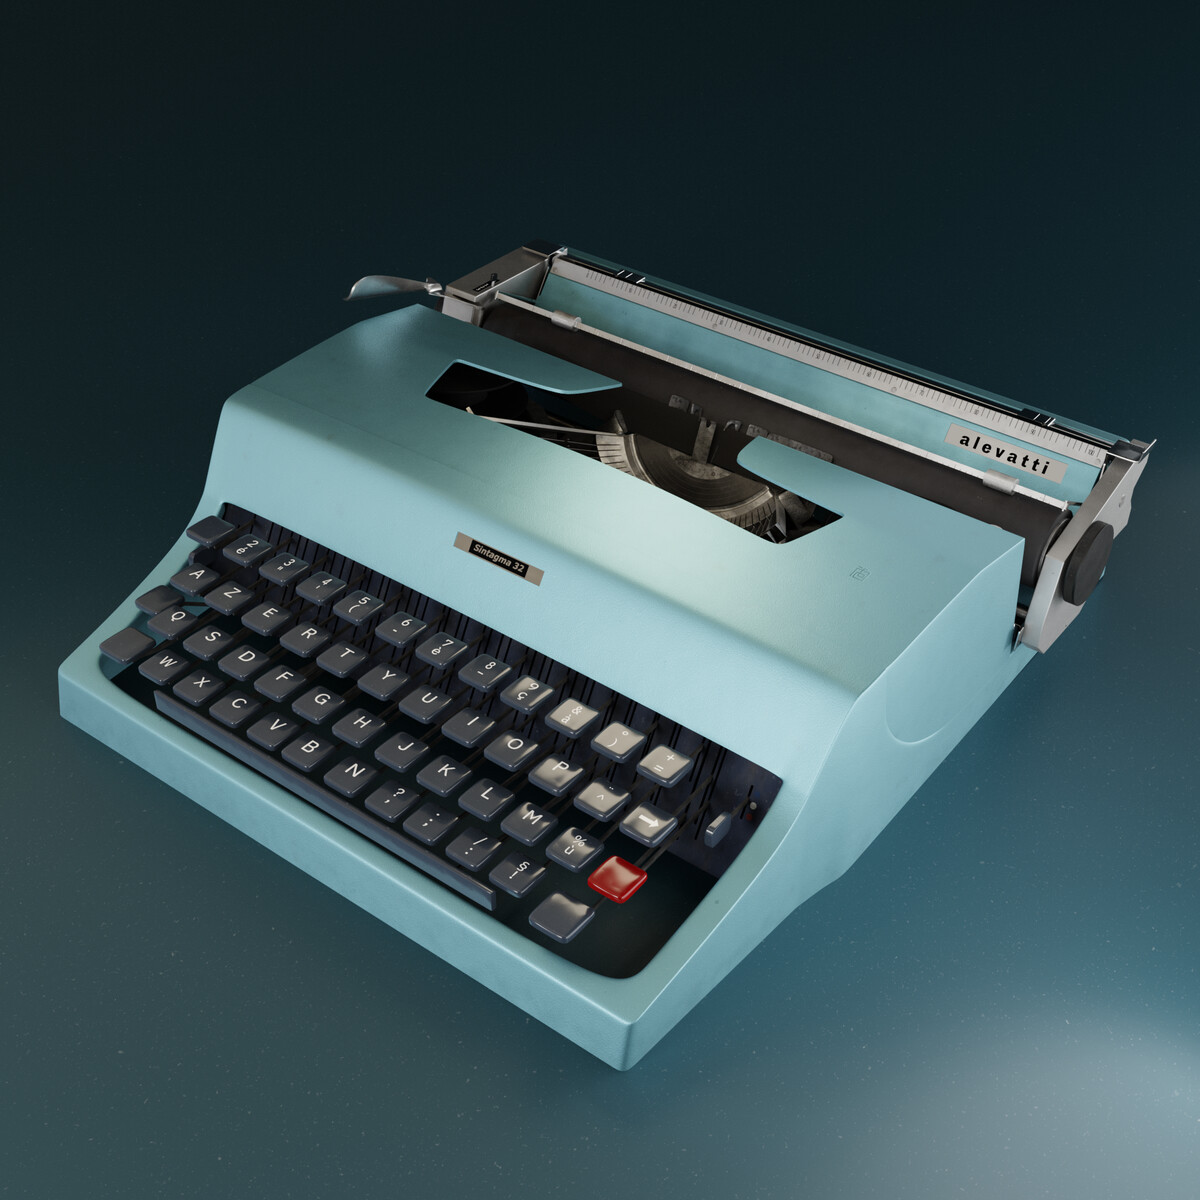 Olivetti Lettera 32: a hyperreal replica - Finished Projects 